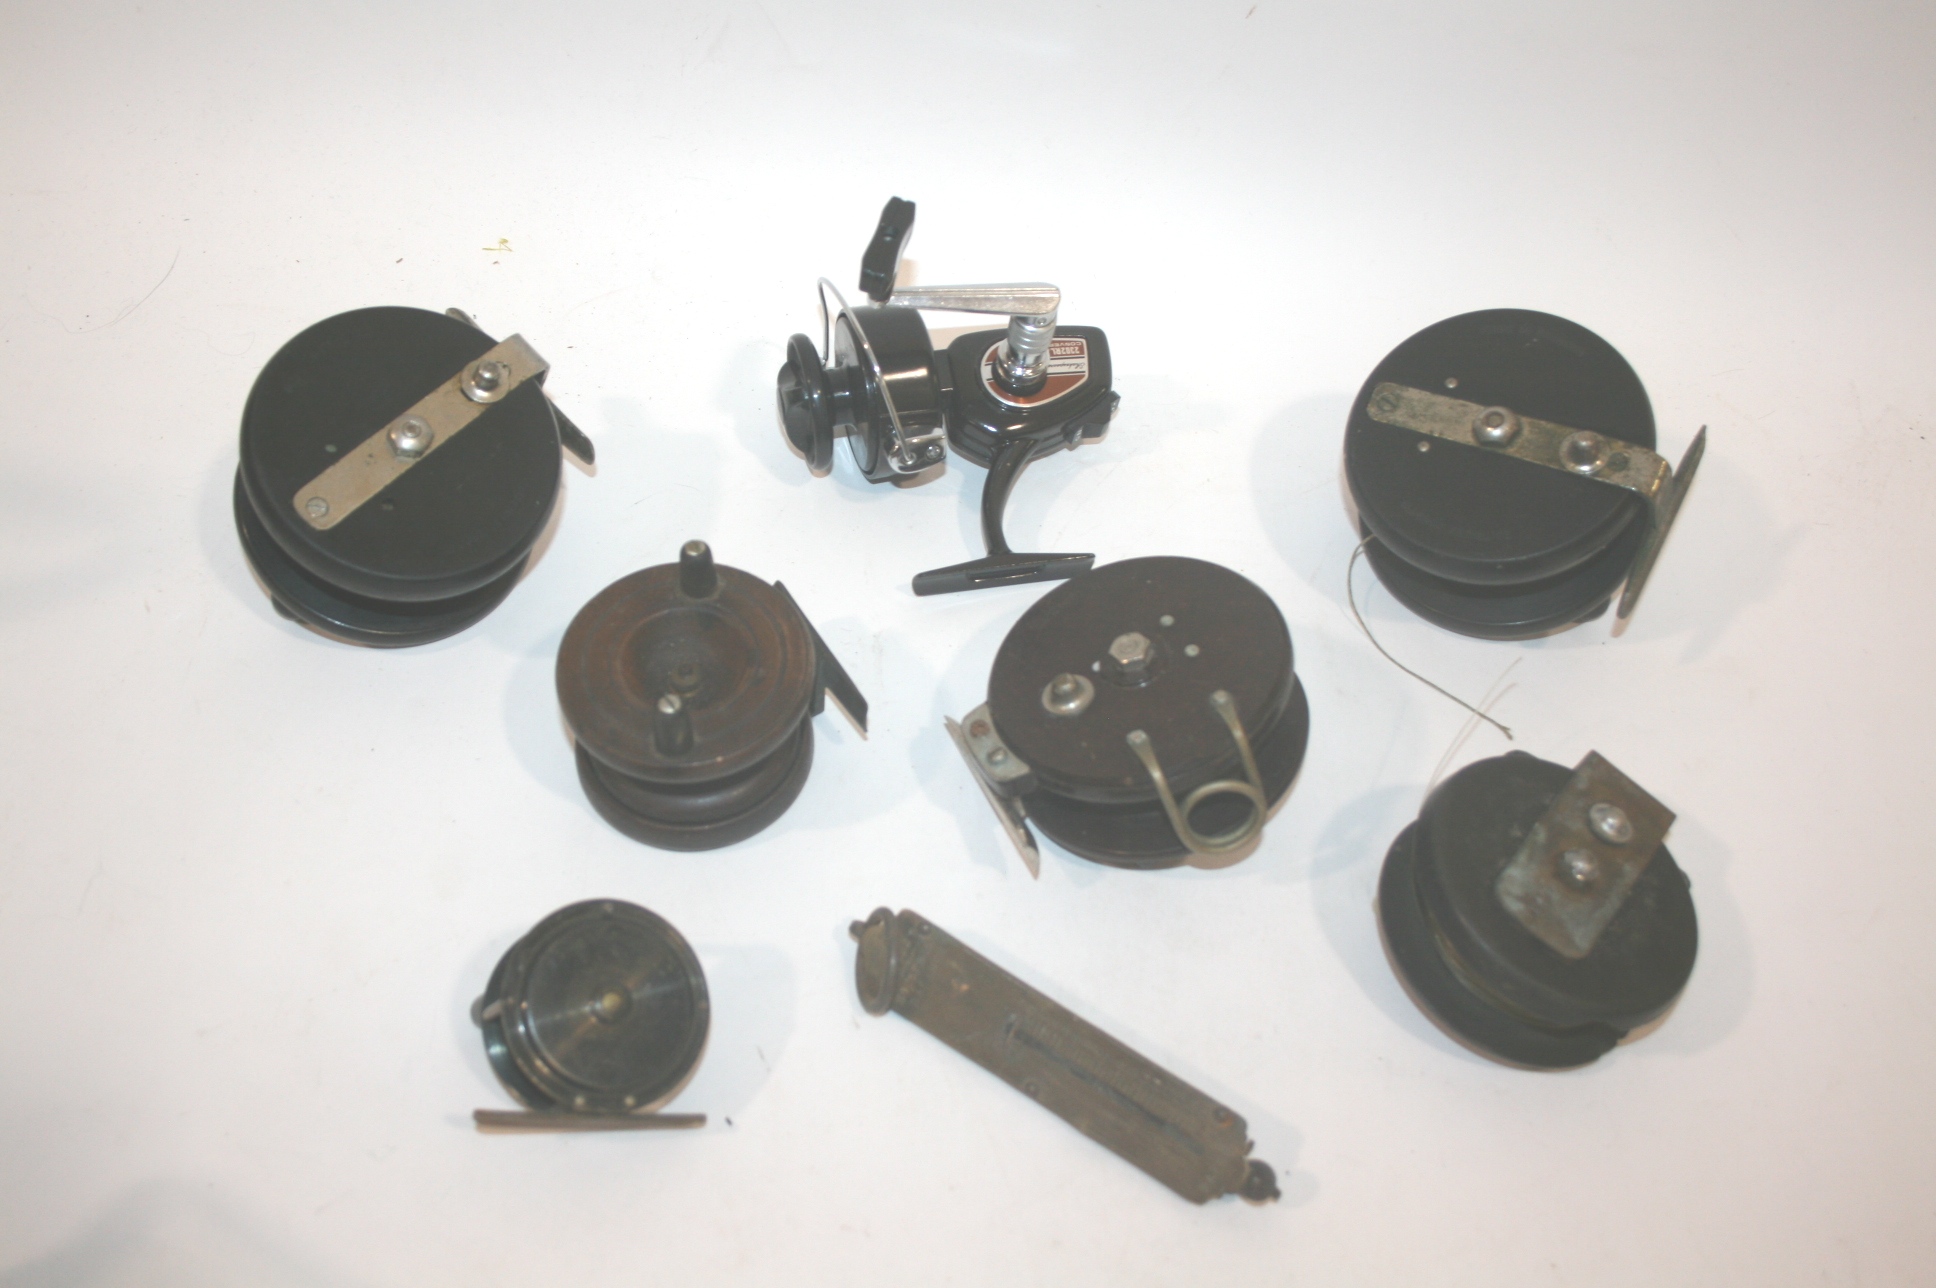 VARIOUS FISHING REELS including 3 Allcock Aerialite reels, a Shakespeare 2302RL Convertiable Reel, M